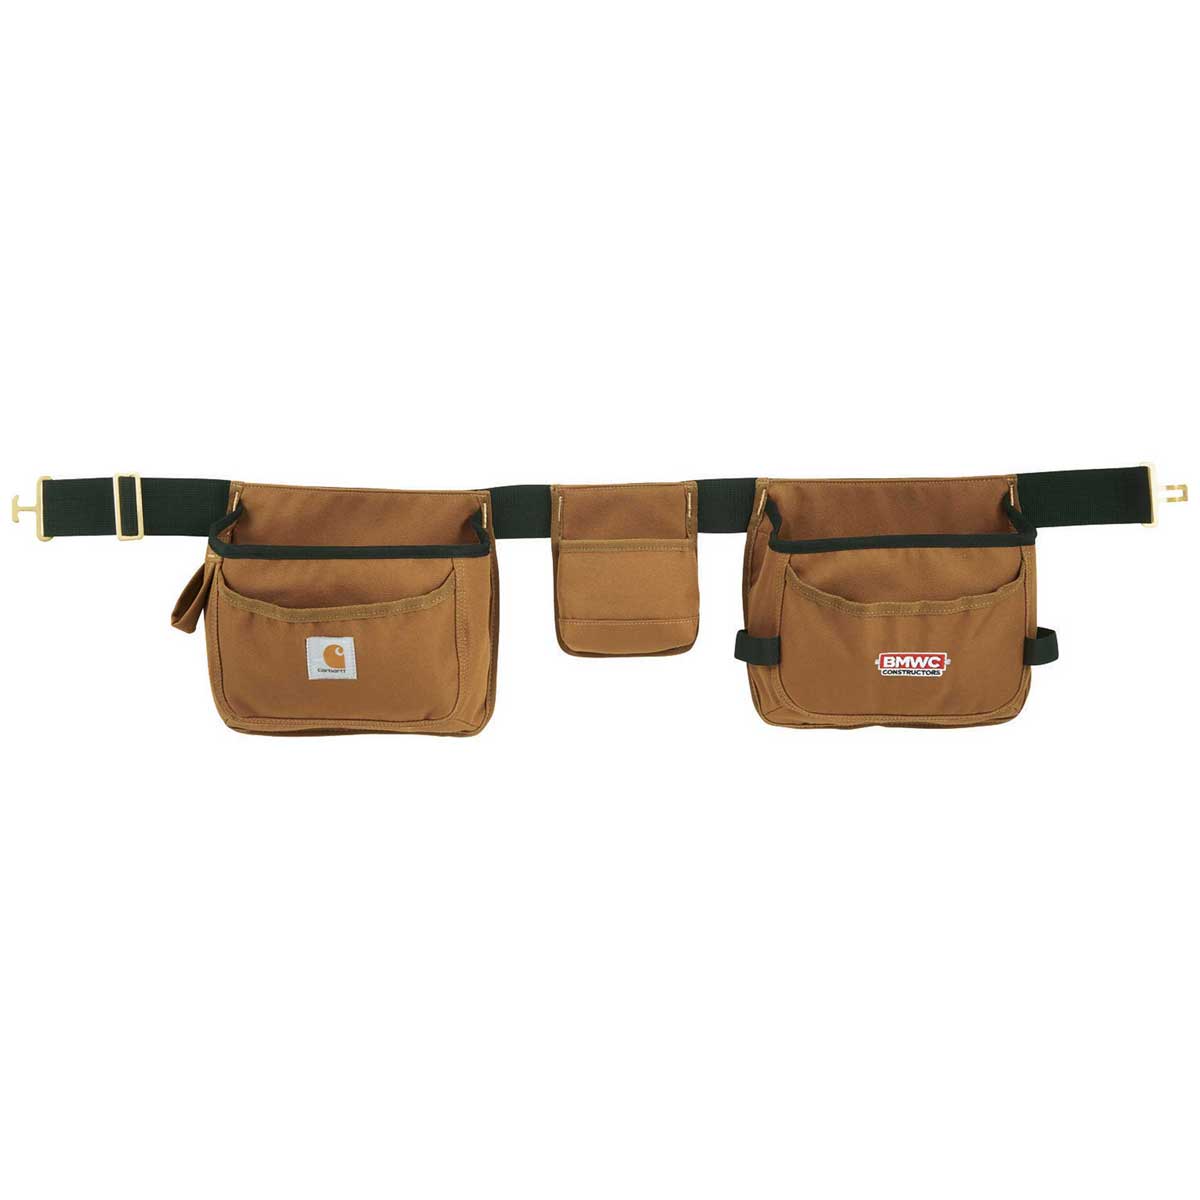 Personalized Carhartt Fanny Pack